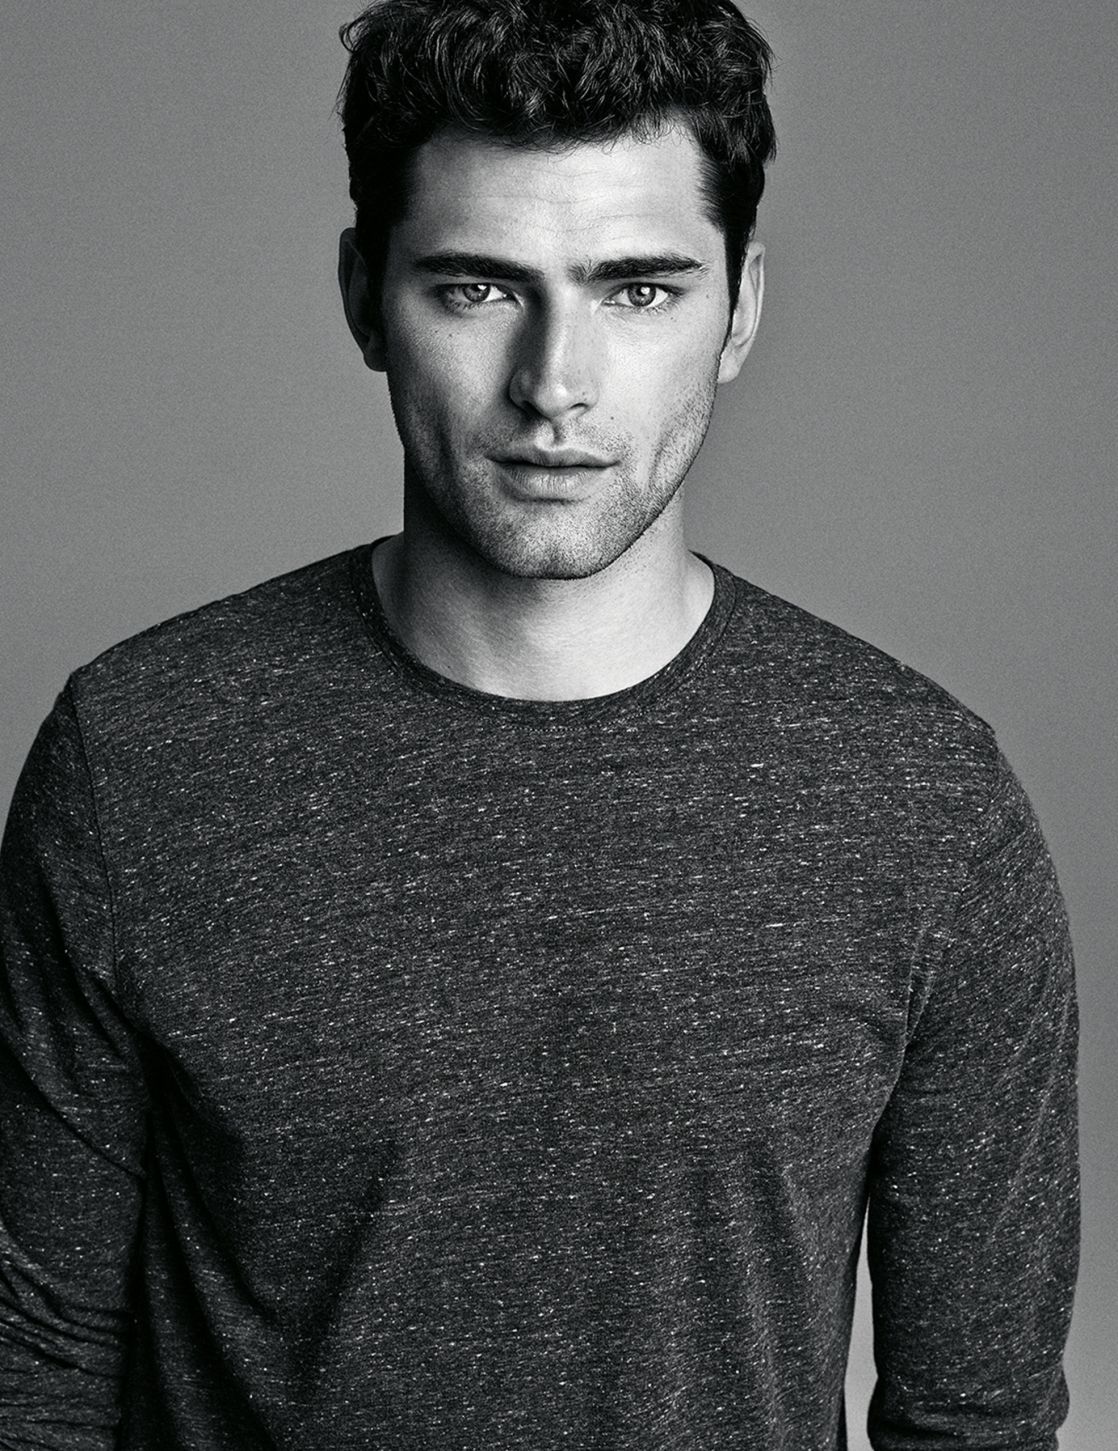 Sean O'Pry Photoshoot Wallpapers